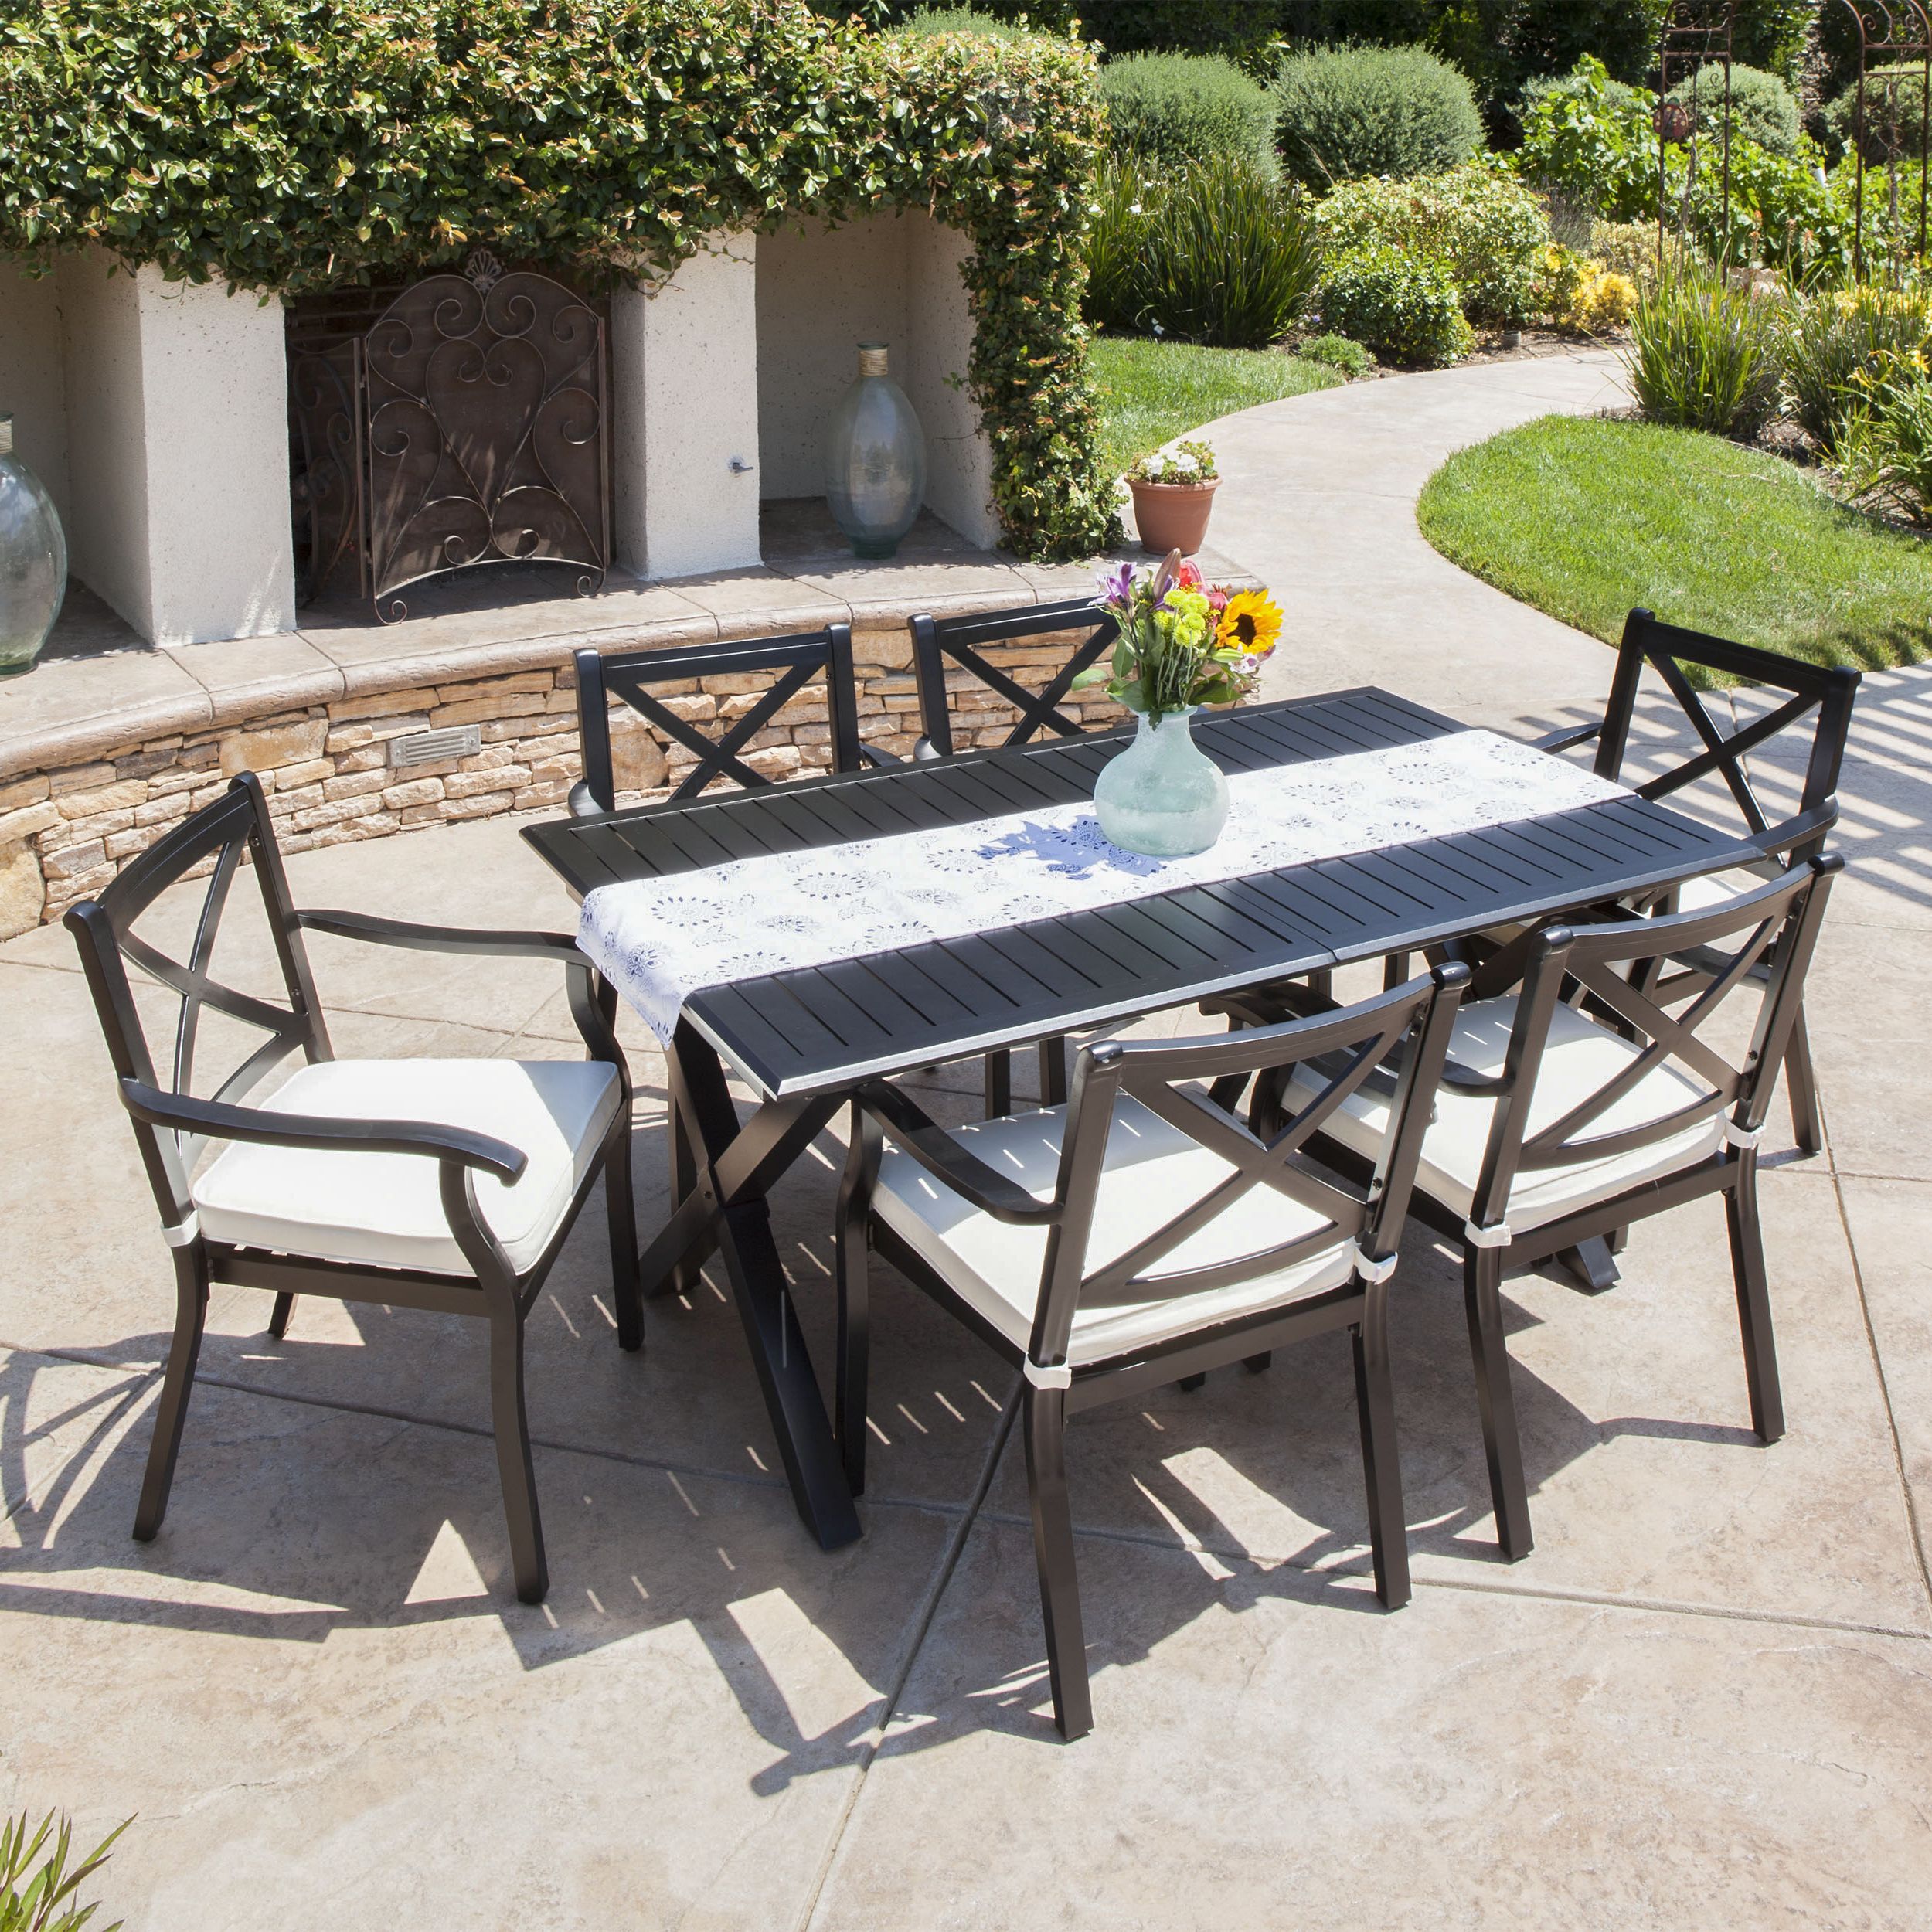 Widely Used Outdoor Expandable 7 Piece Cast Aluminum Dining Set With Cushions,ivory In 7 Piece Patio Dining Sets With Cushions (View 5 of 15)